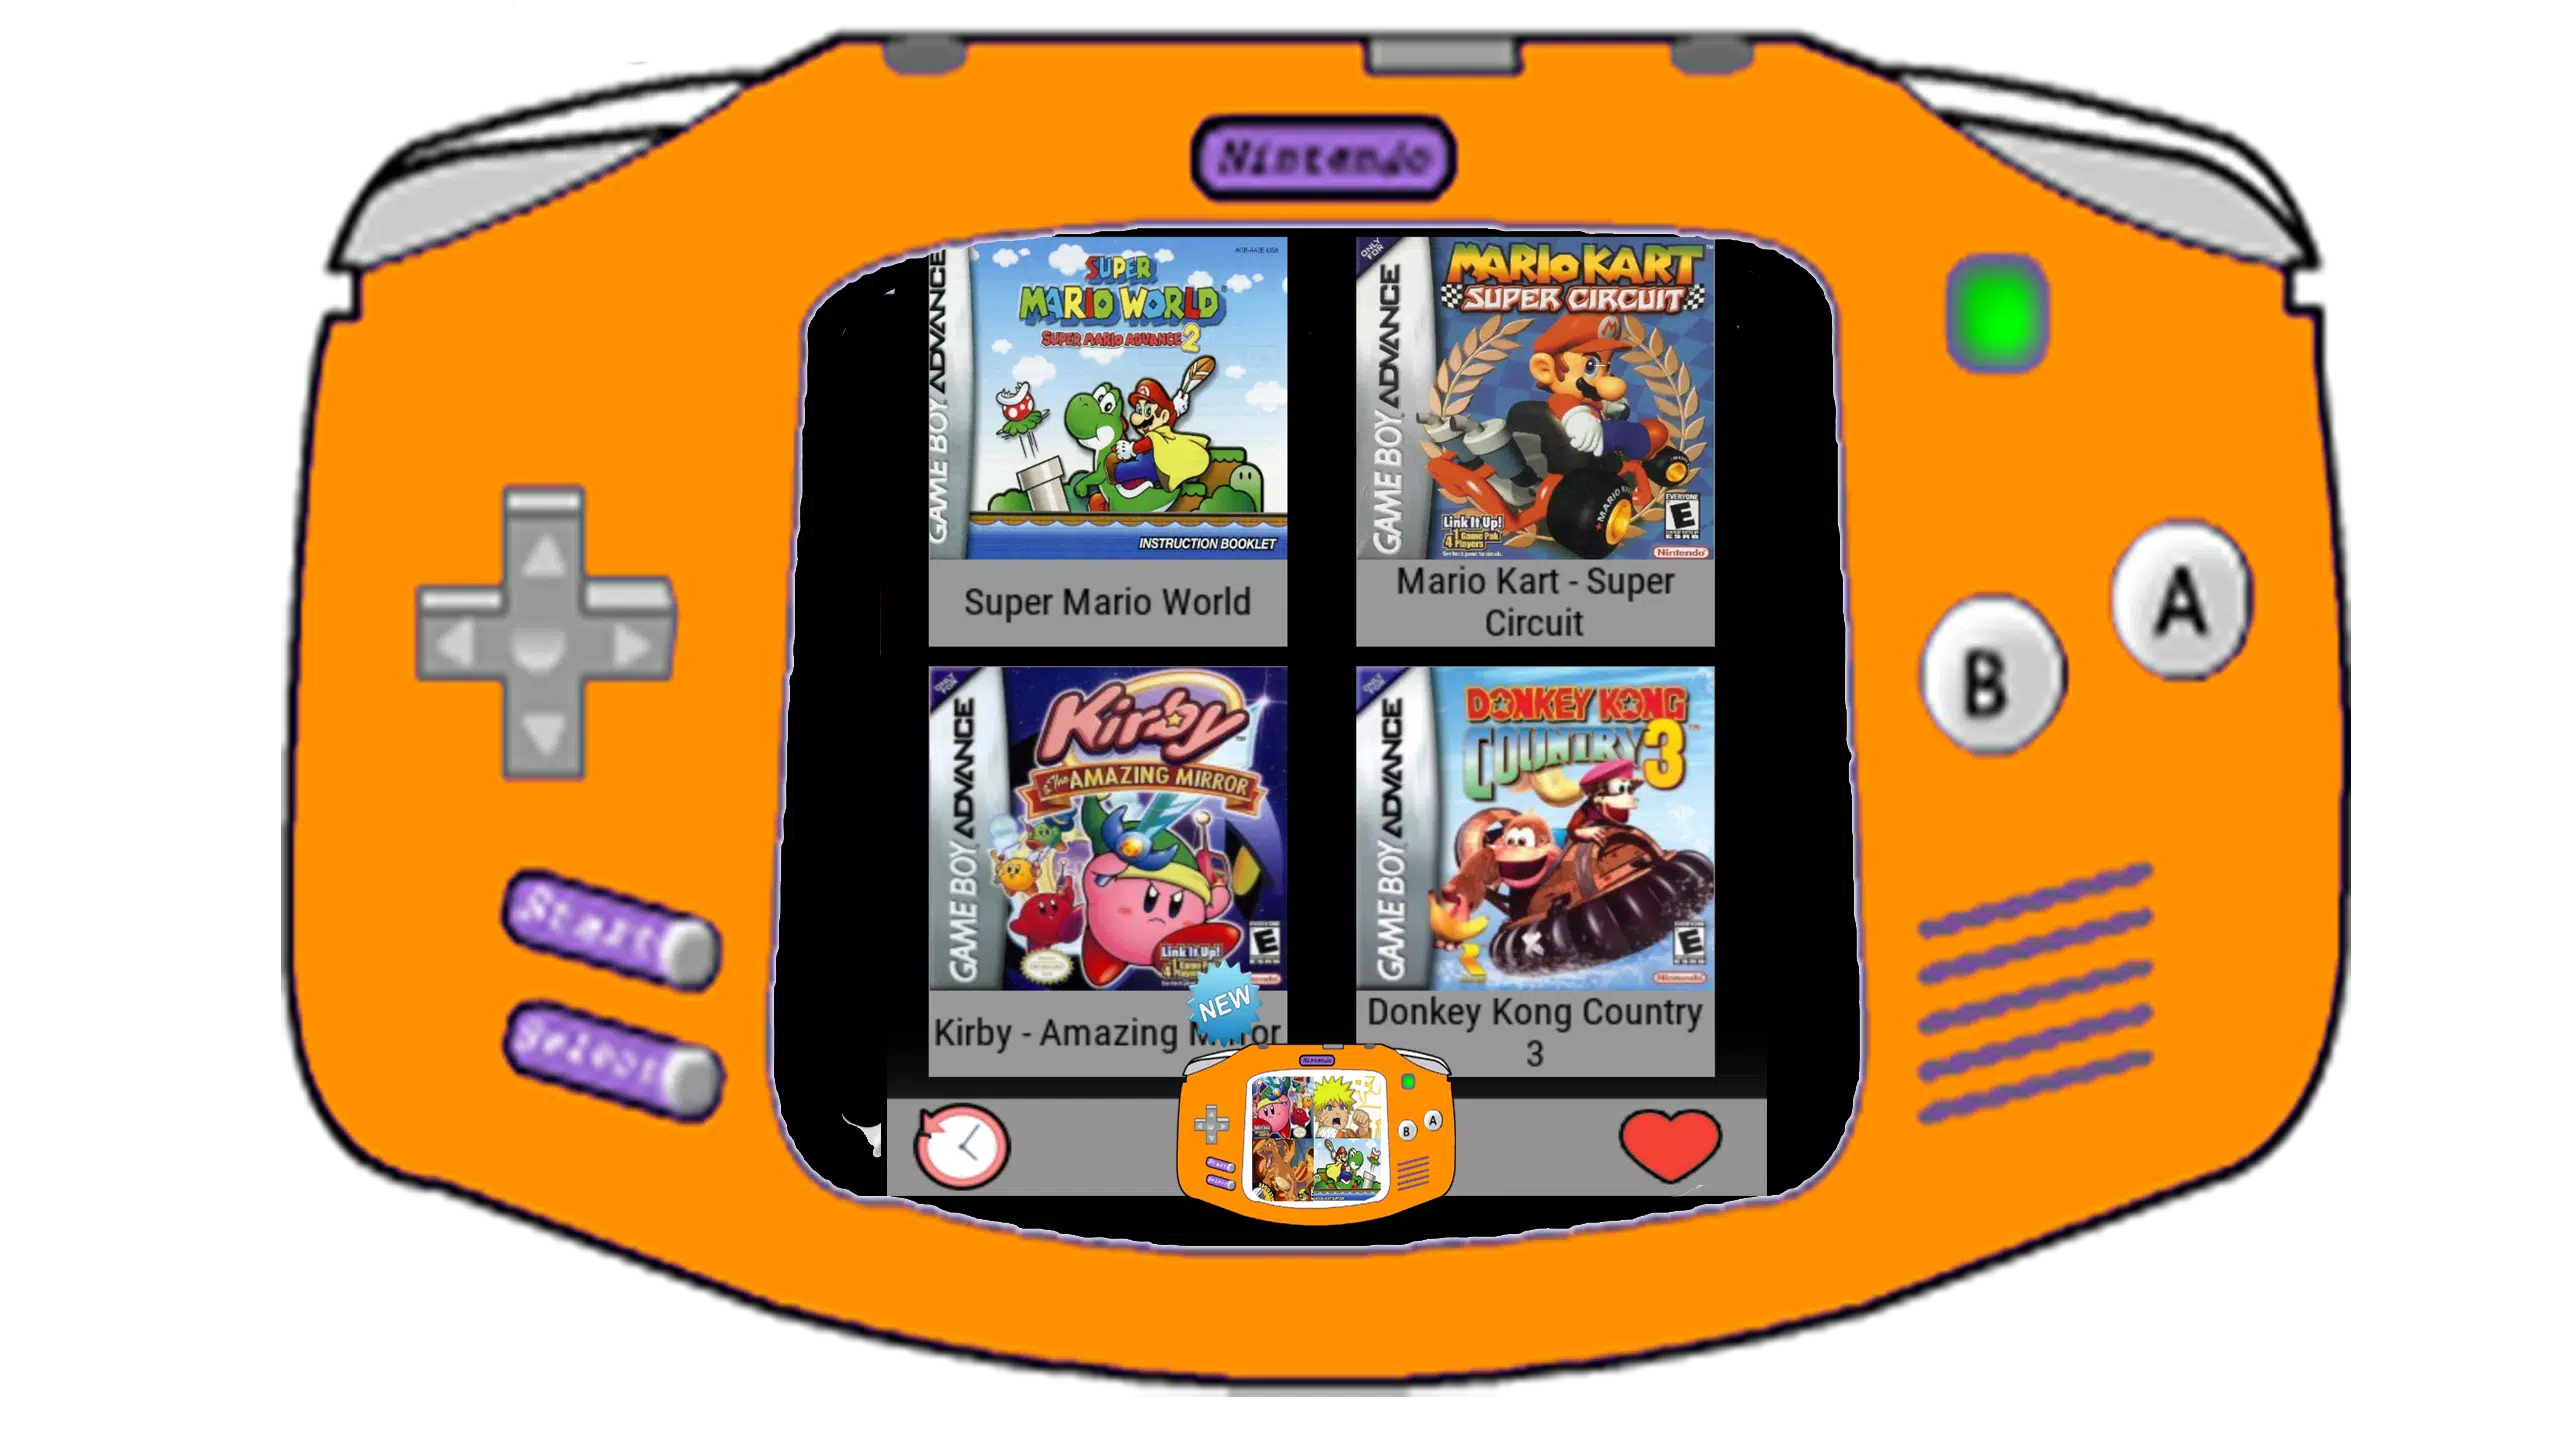 Free GBA Emulator For Android (Play GBA Games) APK voor Android Download